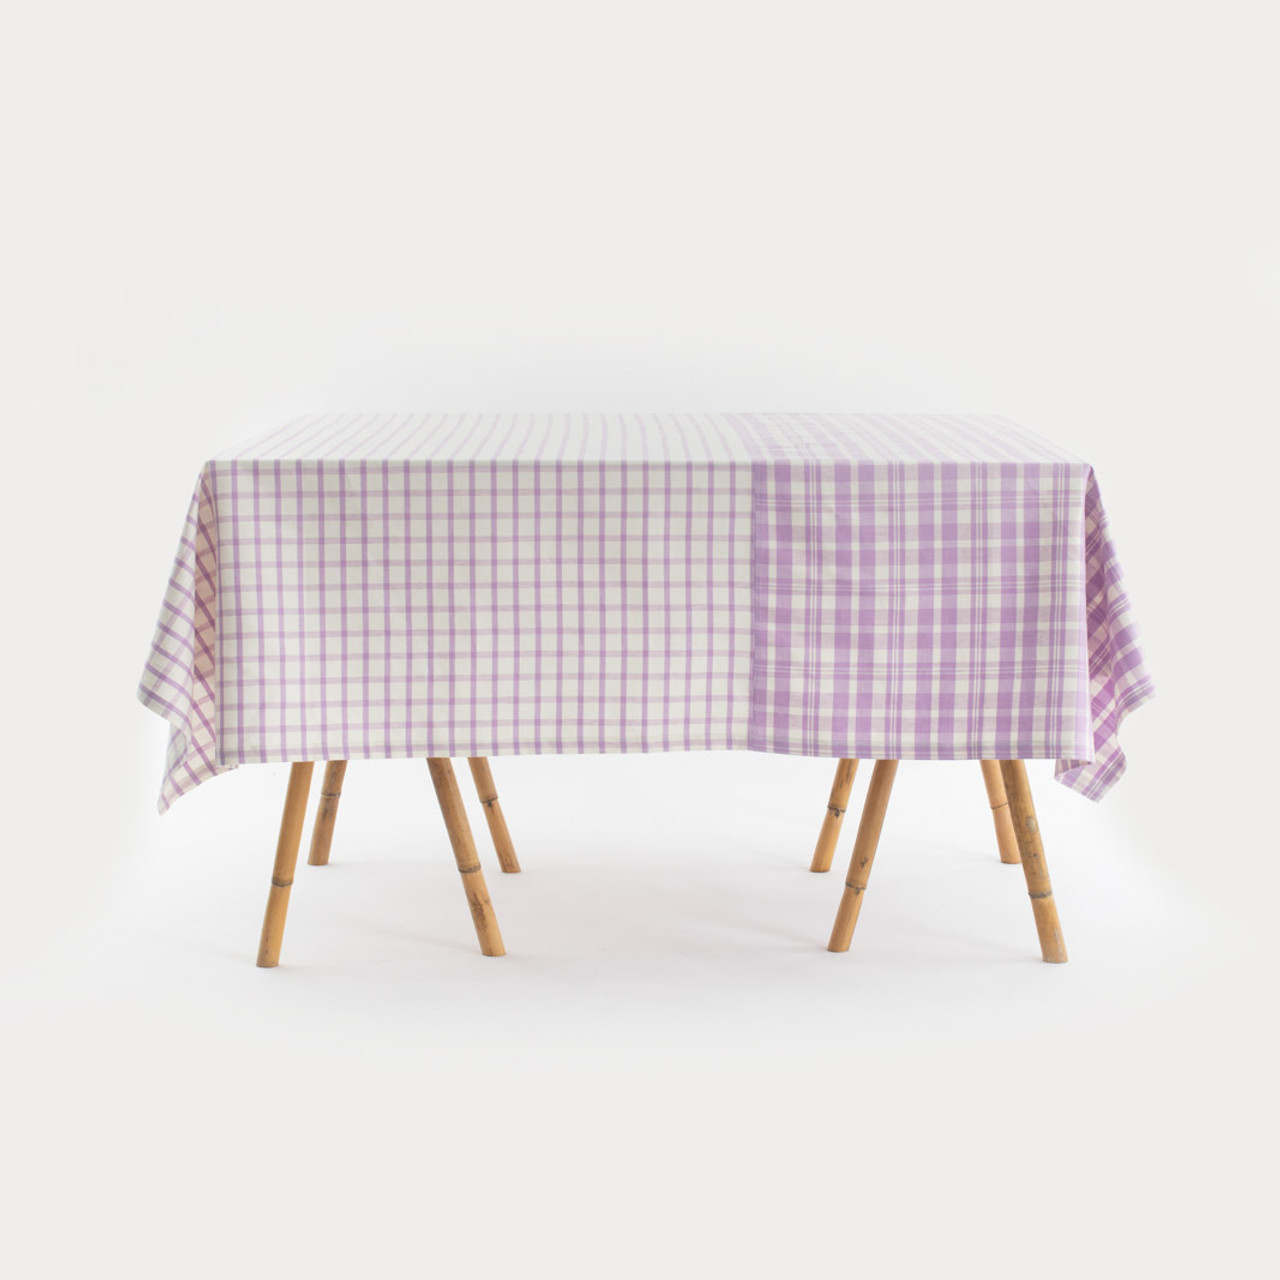 TABLE Large Tablecloth